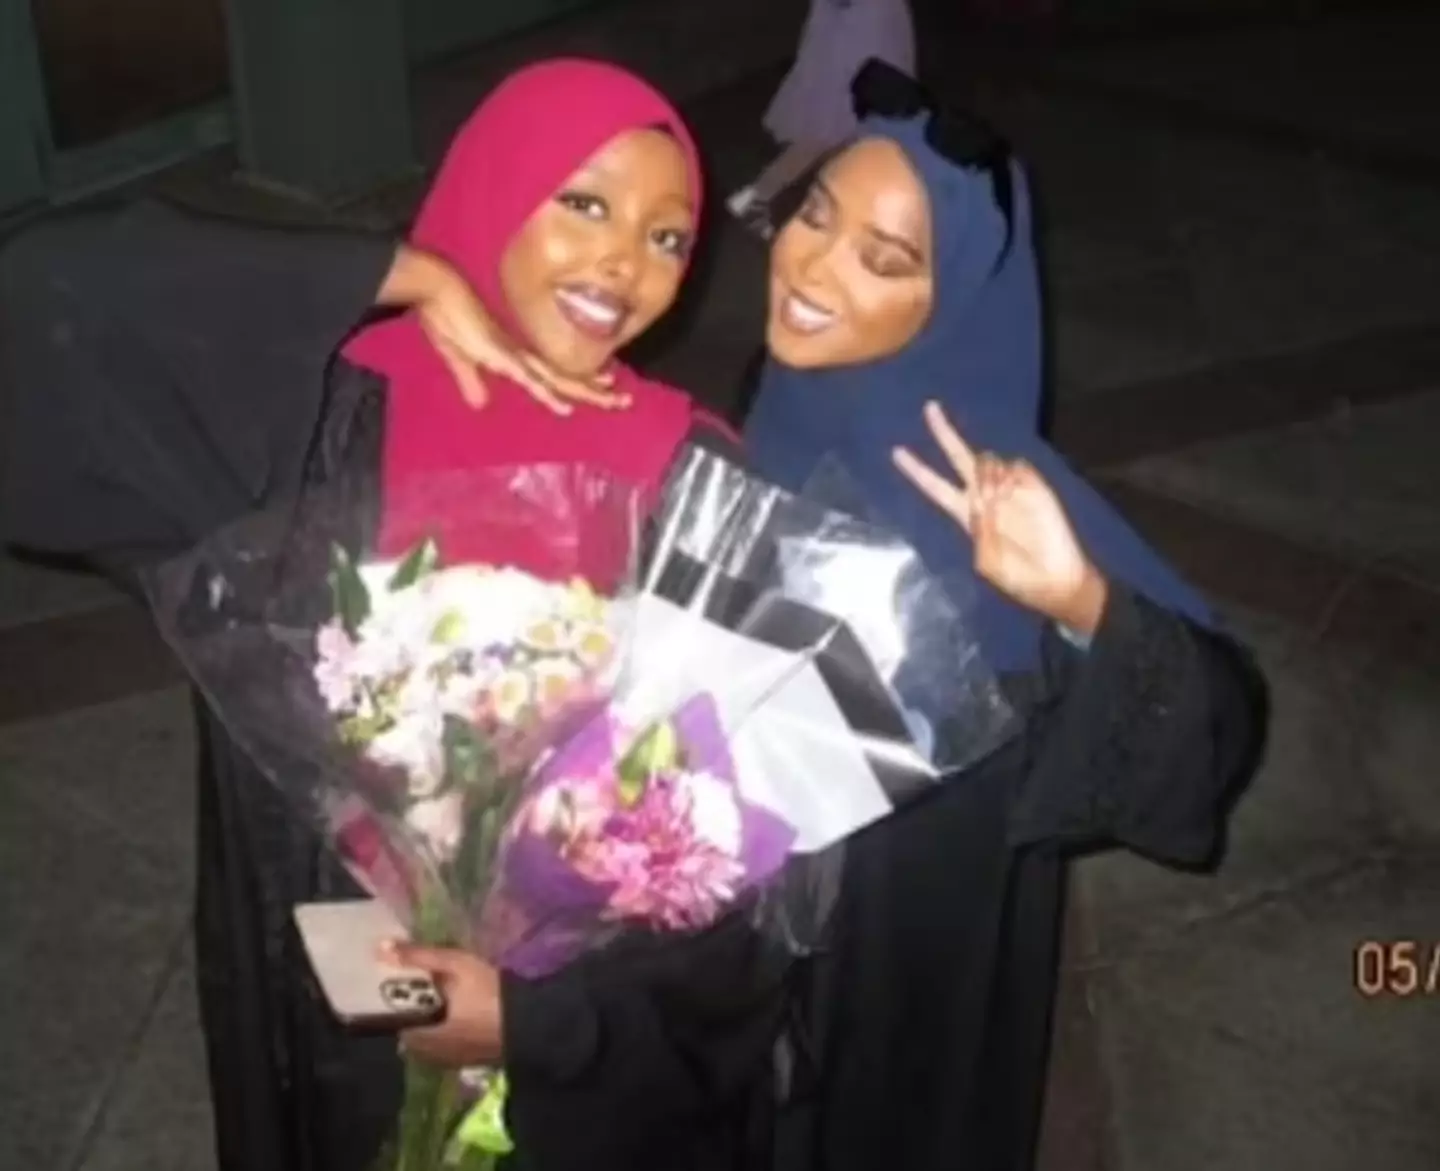 Sahra Gesaade, 20, and Salma Abdikadir, 20, both died after another car slammed into the one they were in.